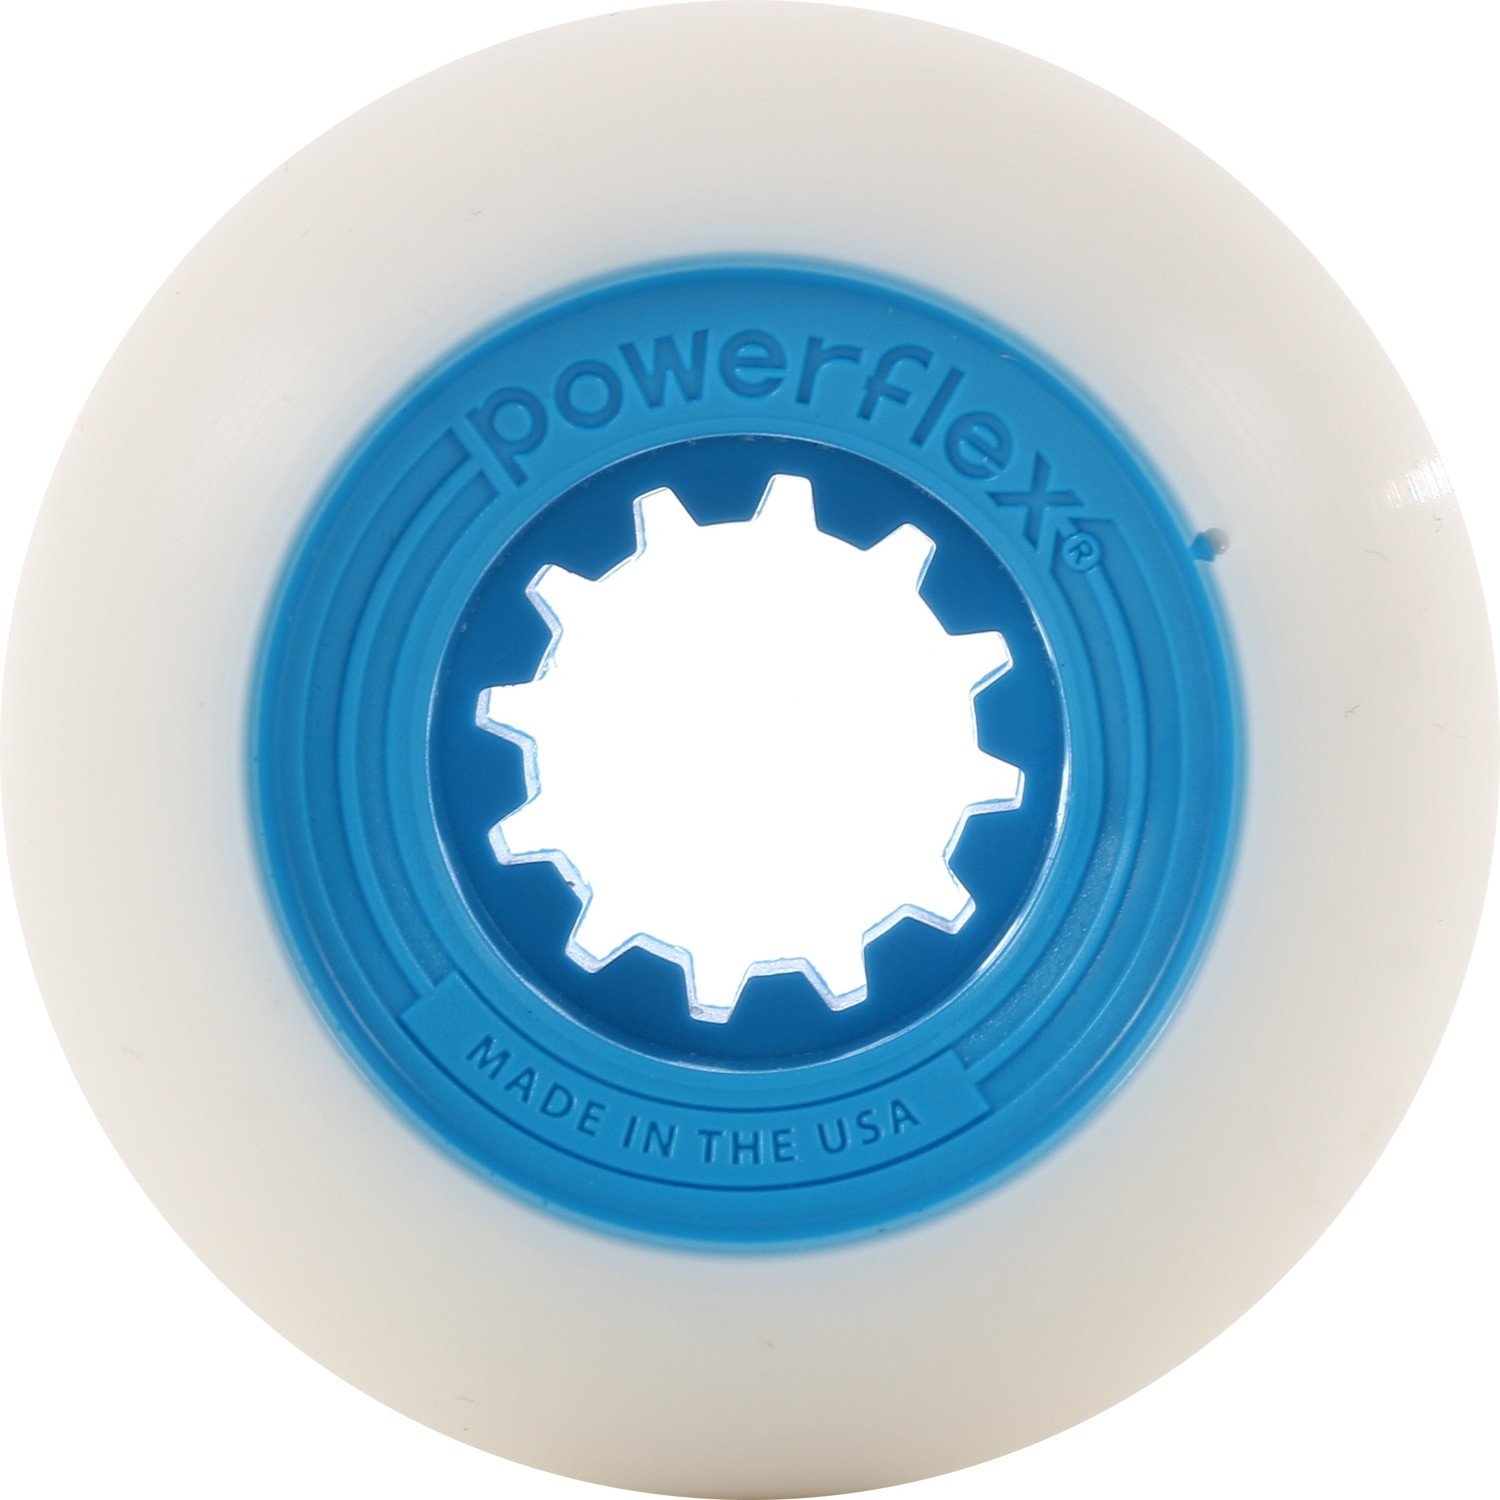 Powerflex Gumball™ Core wheels are perfect for street skating, skateparks, backyard pools and DIY spots.